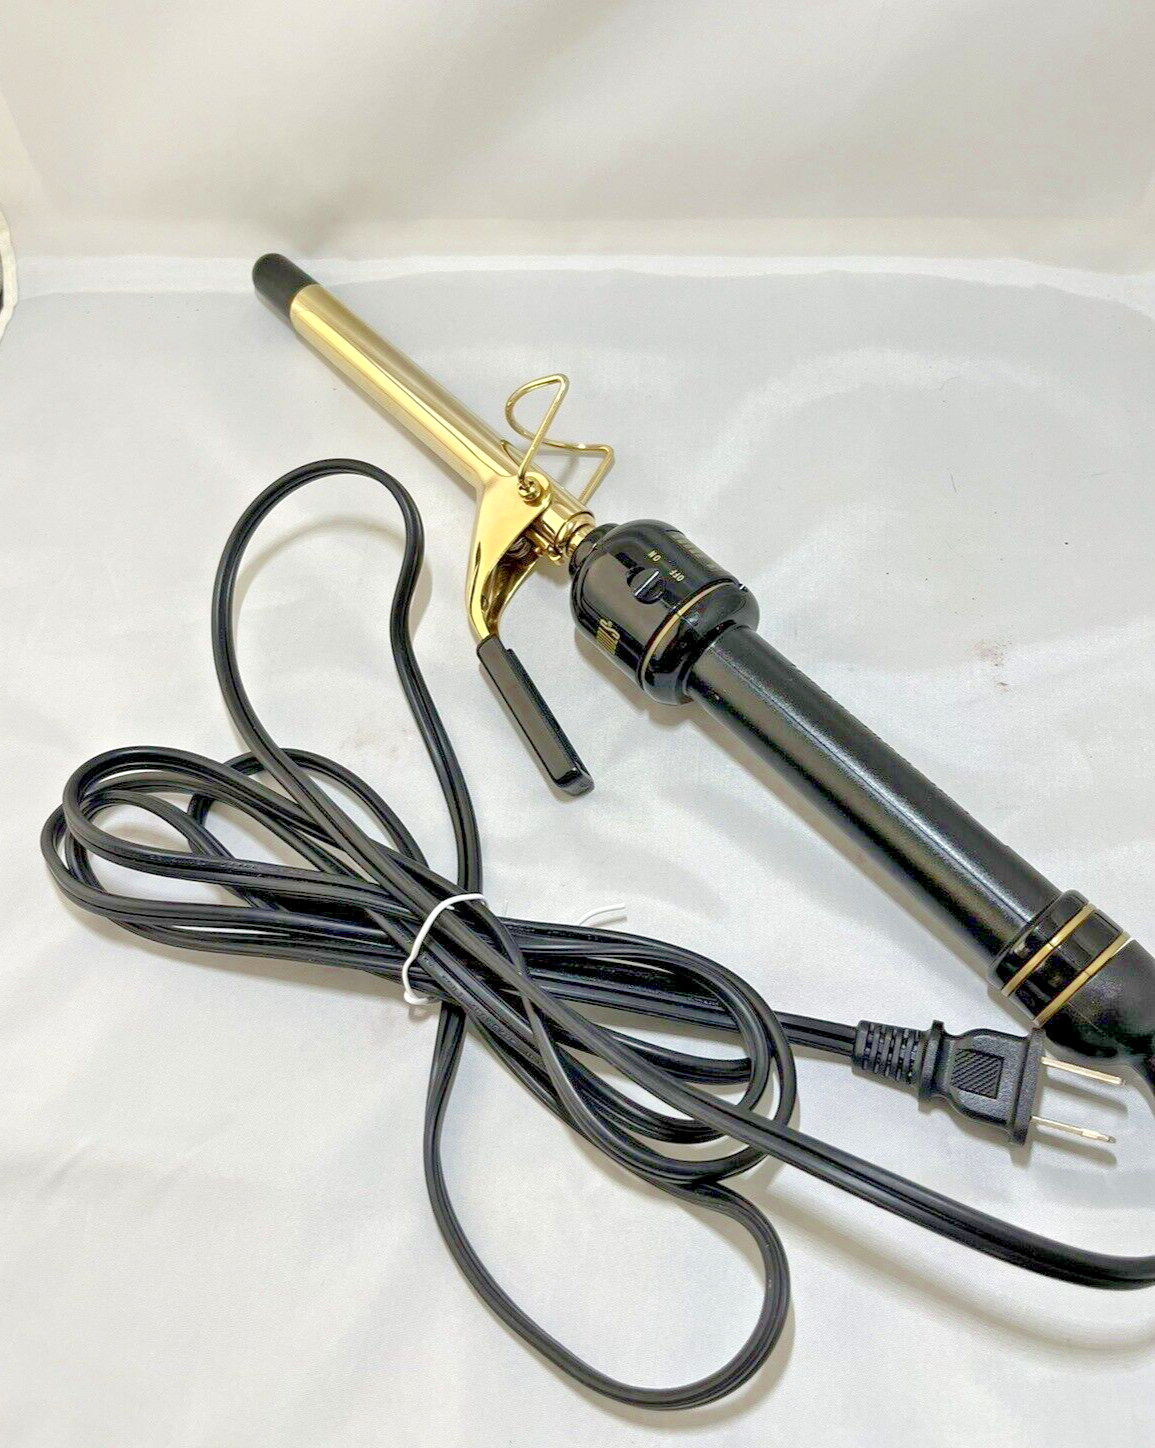 Hot Tools Professional 1009 Curling Iron - Gold Pre Owned - $19.31